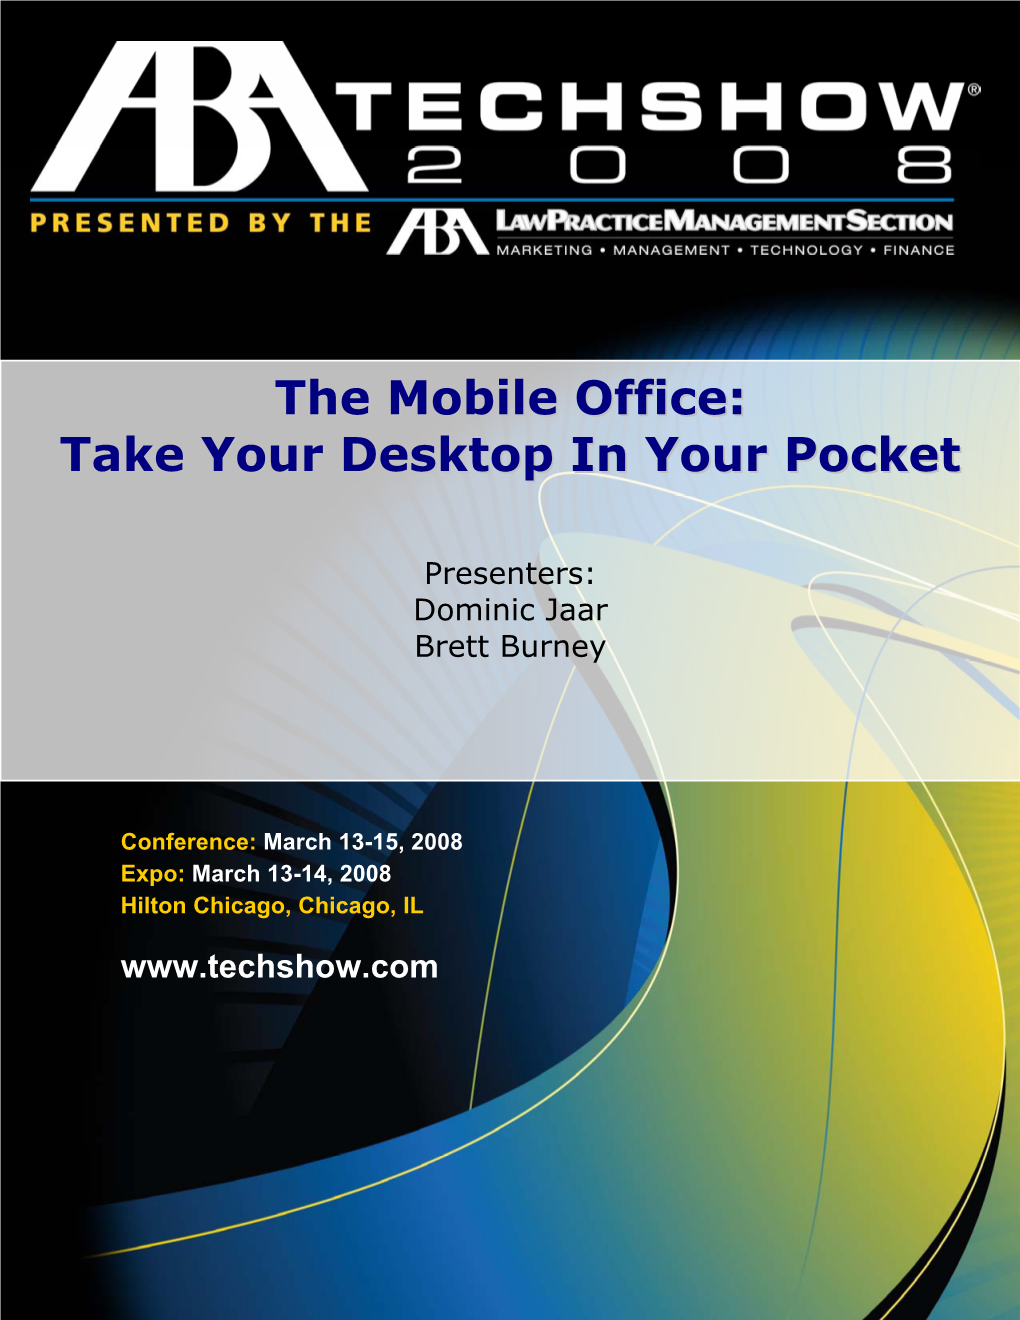 The Mobile Office: Take Your Desktop in Your Pocket